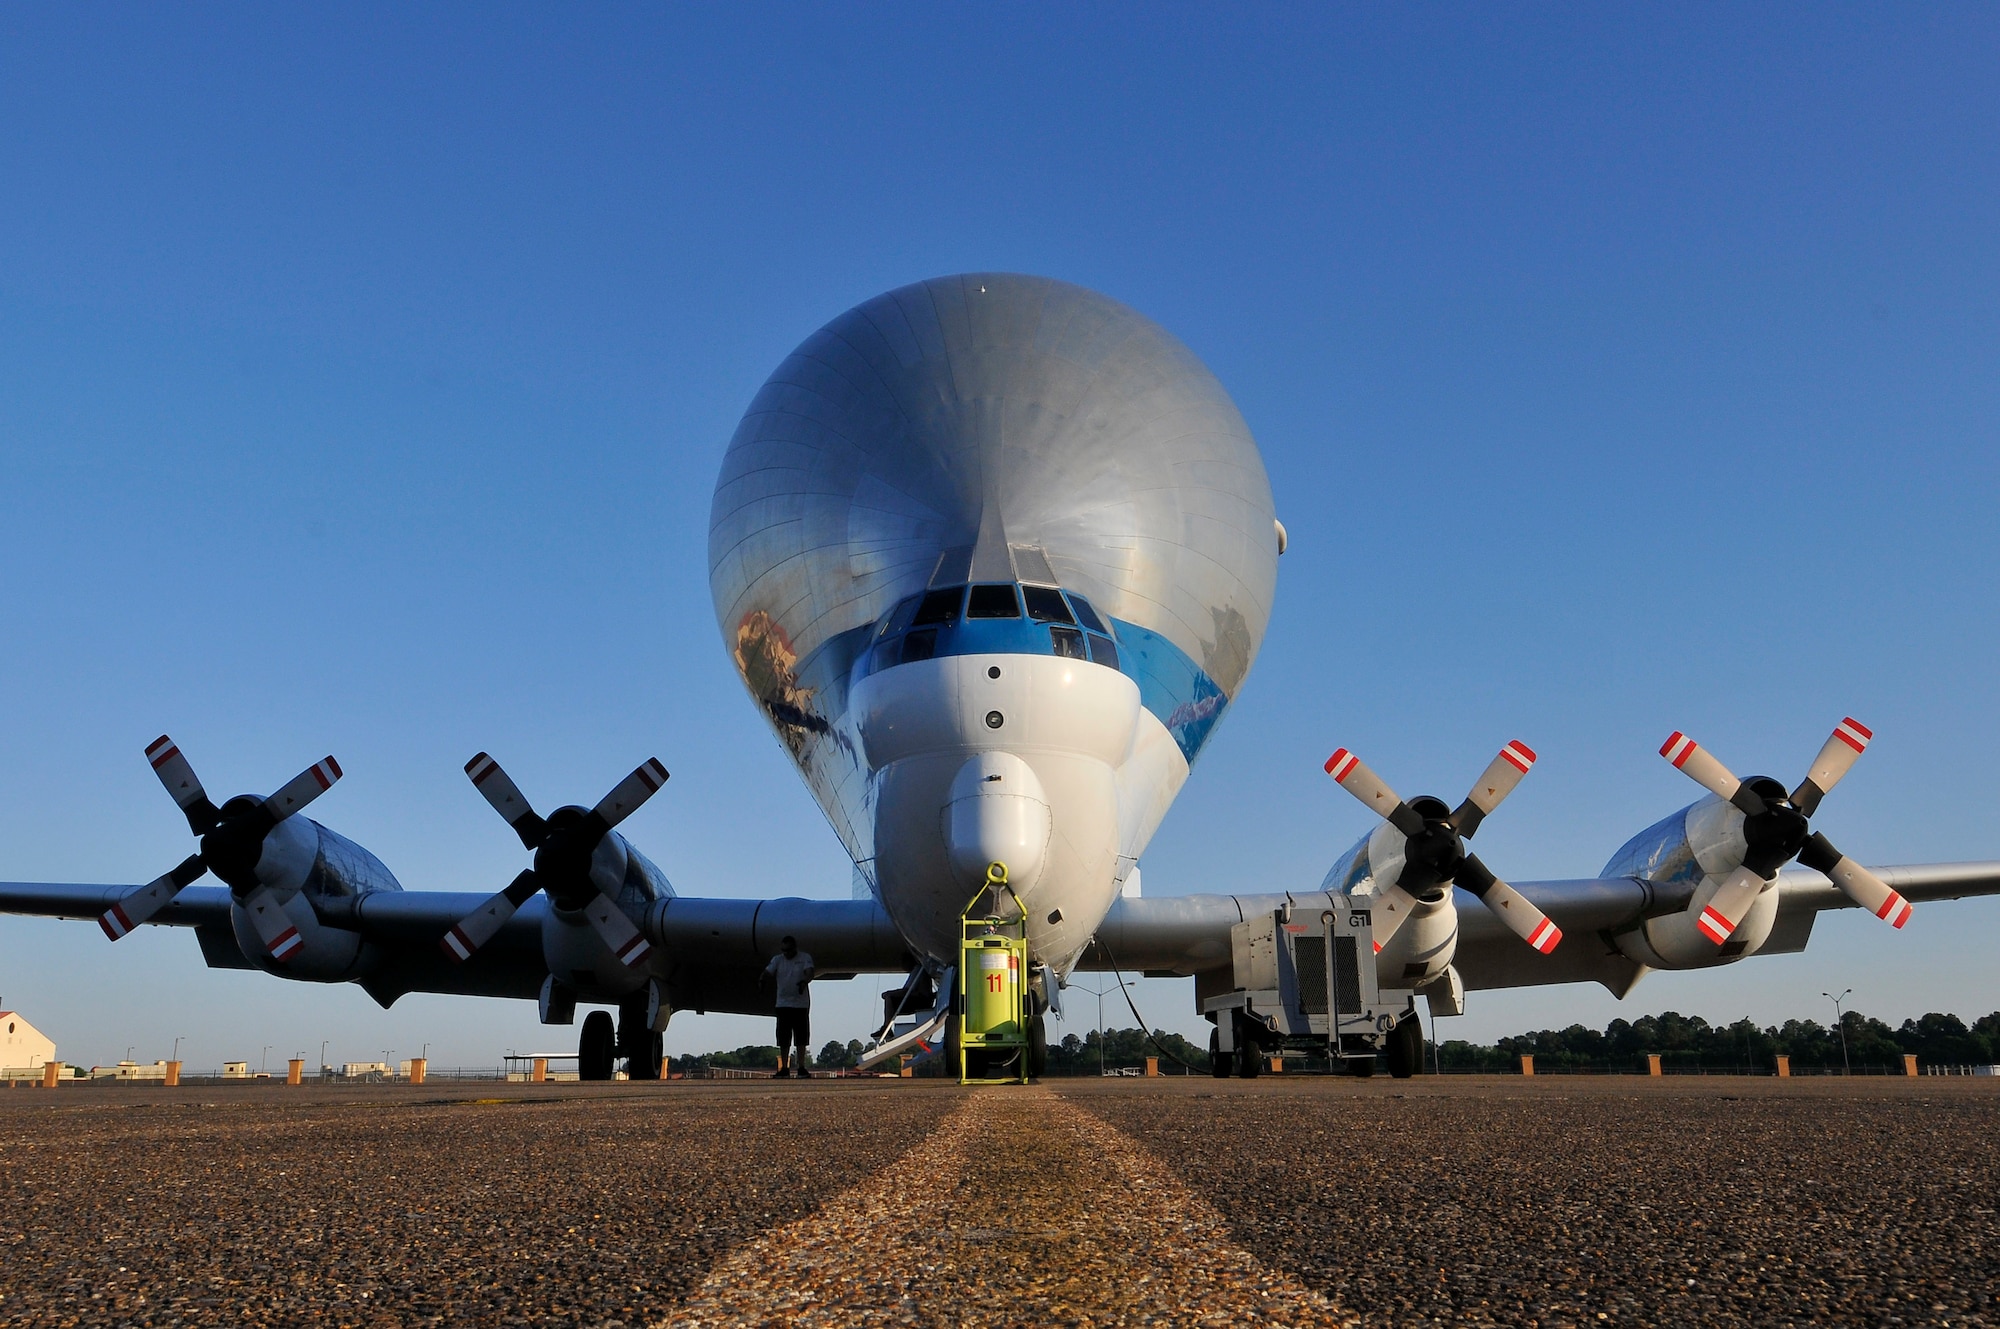 NASA's Aero Spacelines Super Guppy sits on the ramp at Maxwell Air Force Base, Alabama, on April 21, 2015, after diverting for weather as it headed to the Kennedy Space Center in Florida. The Super Guppy is a large, wide-bodied cargo aircraft that is used for hauling oversize cargo components. The aircraft measures more than 48 feet to the top of its tail and has a wingspan of more than 156 feet with a 25-foot diameter cargo bay. The aircraft features a hinged nose that opens 110 degrees. (Air Force Photo by Thomas Meneguin/Cleared)